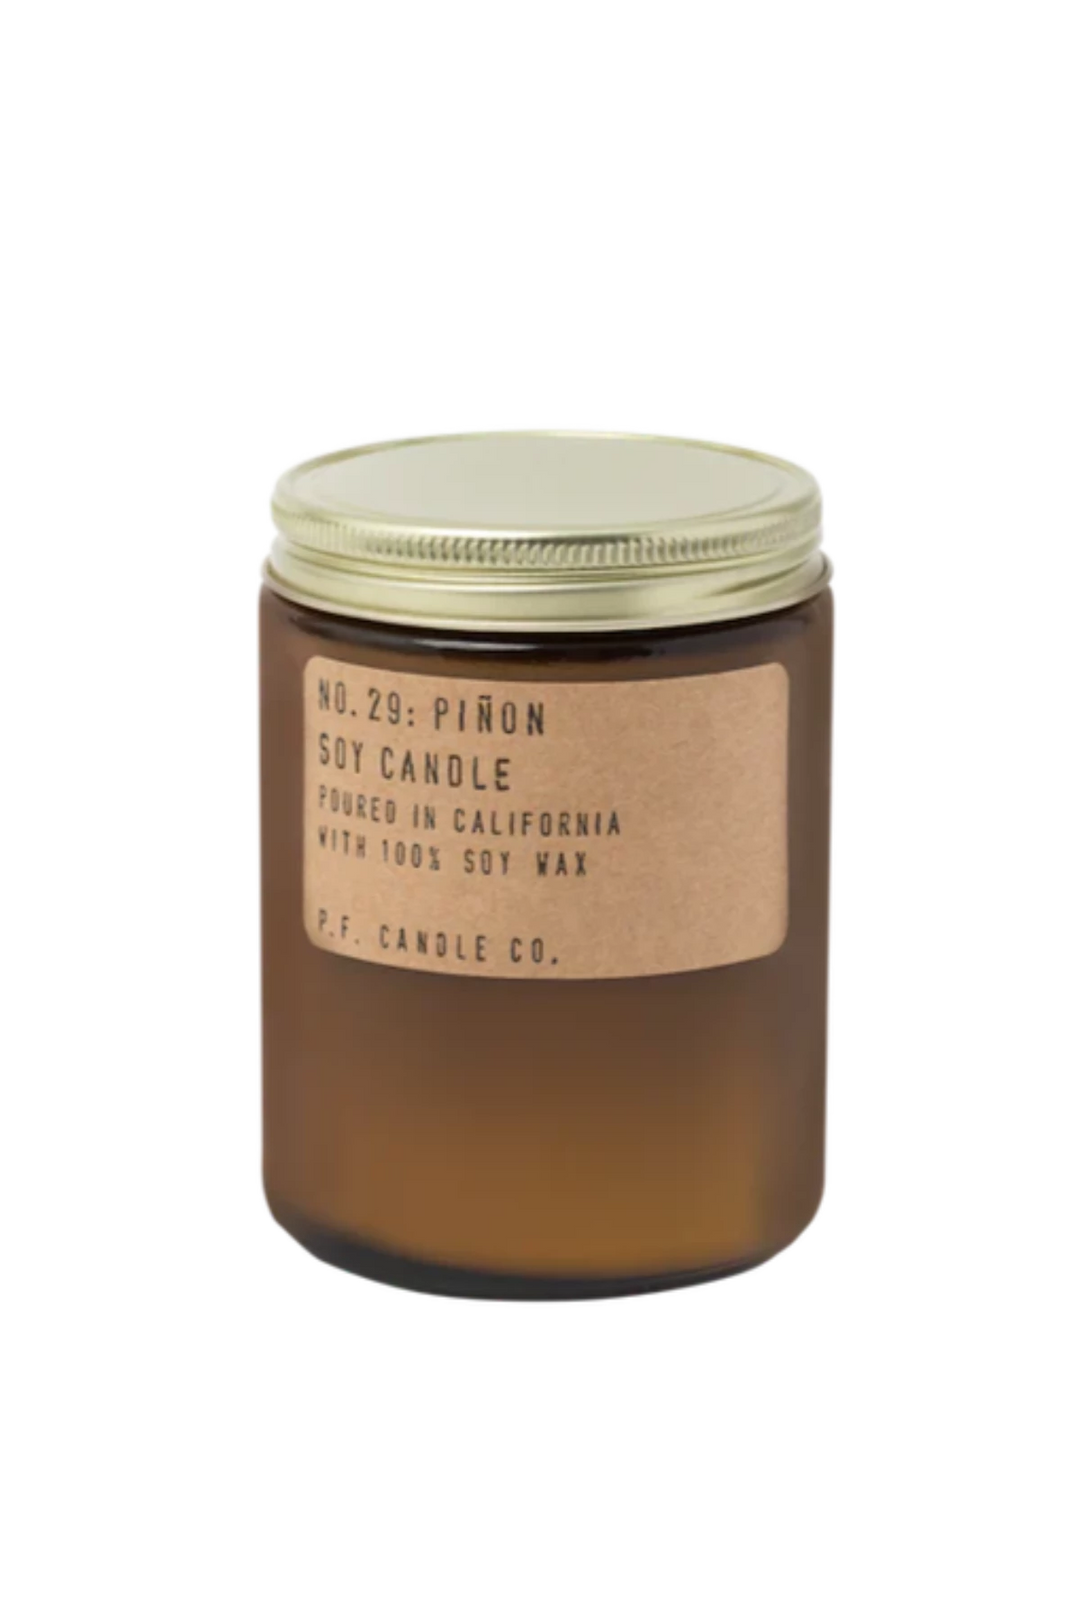 P.F. CANDLE CO. - SOY CANDLE 7.2 OZ - PINON